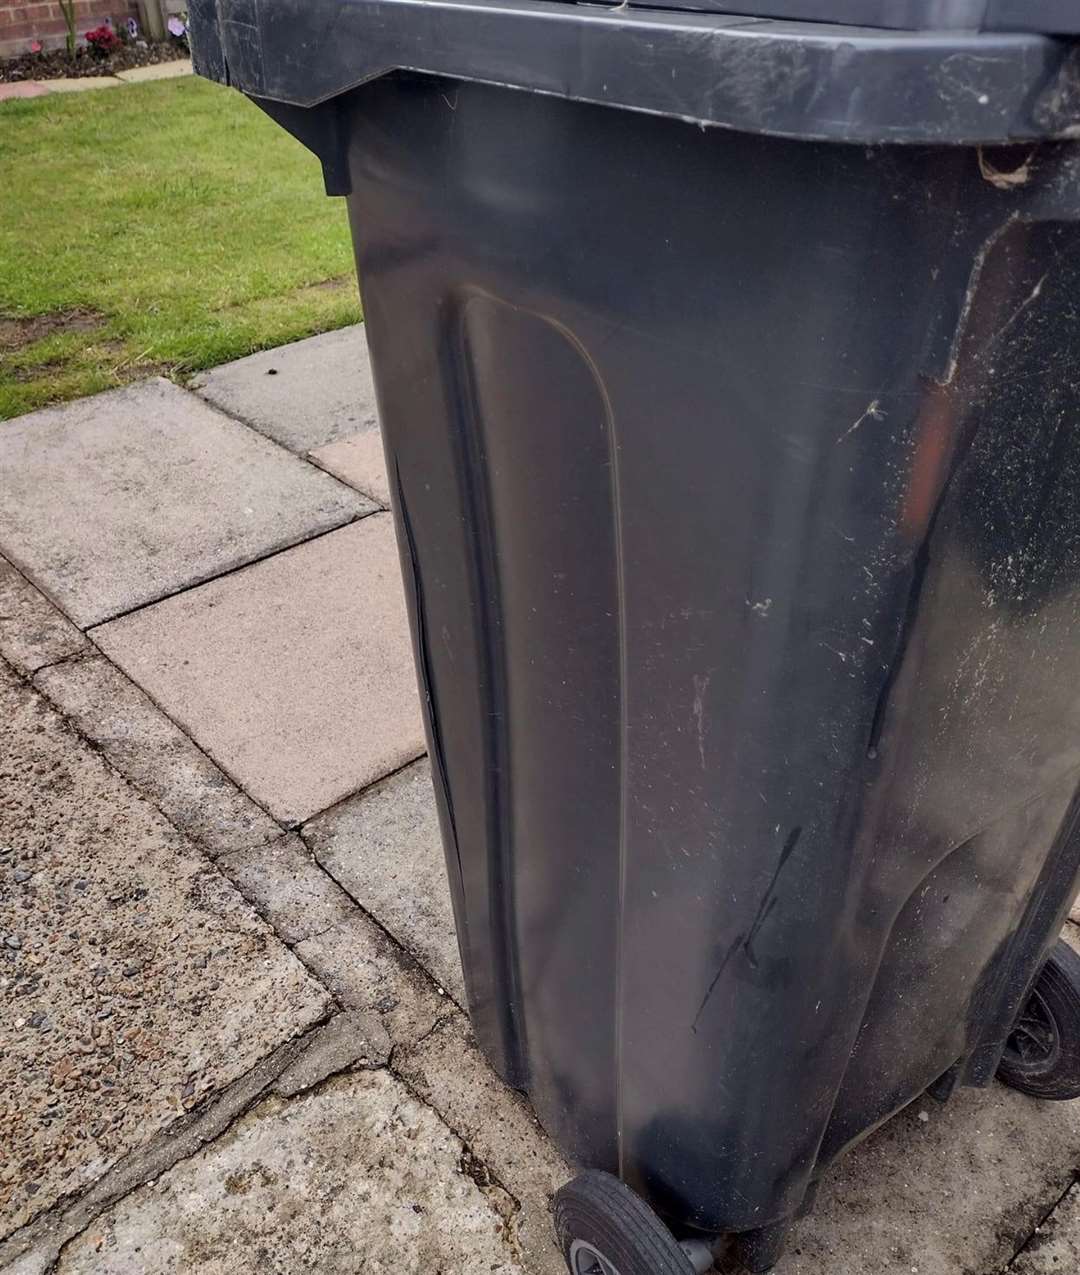 Trevor Watson says he has seen both his garden and household bin damaged this month